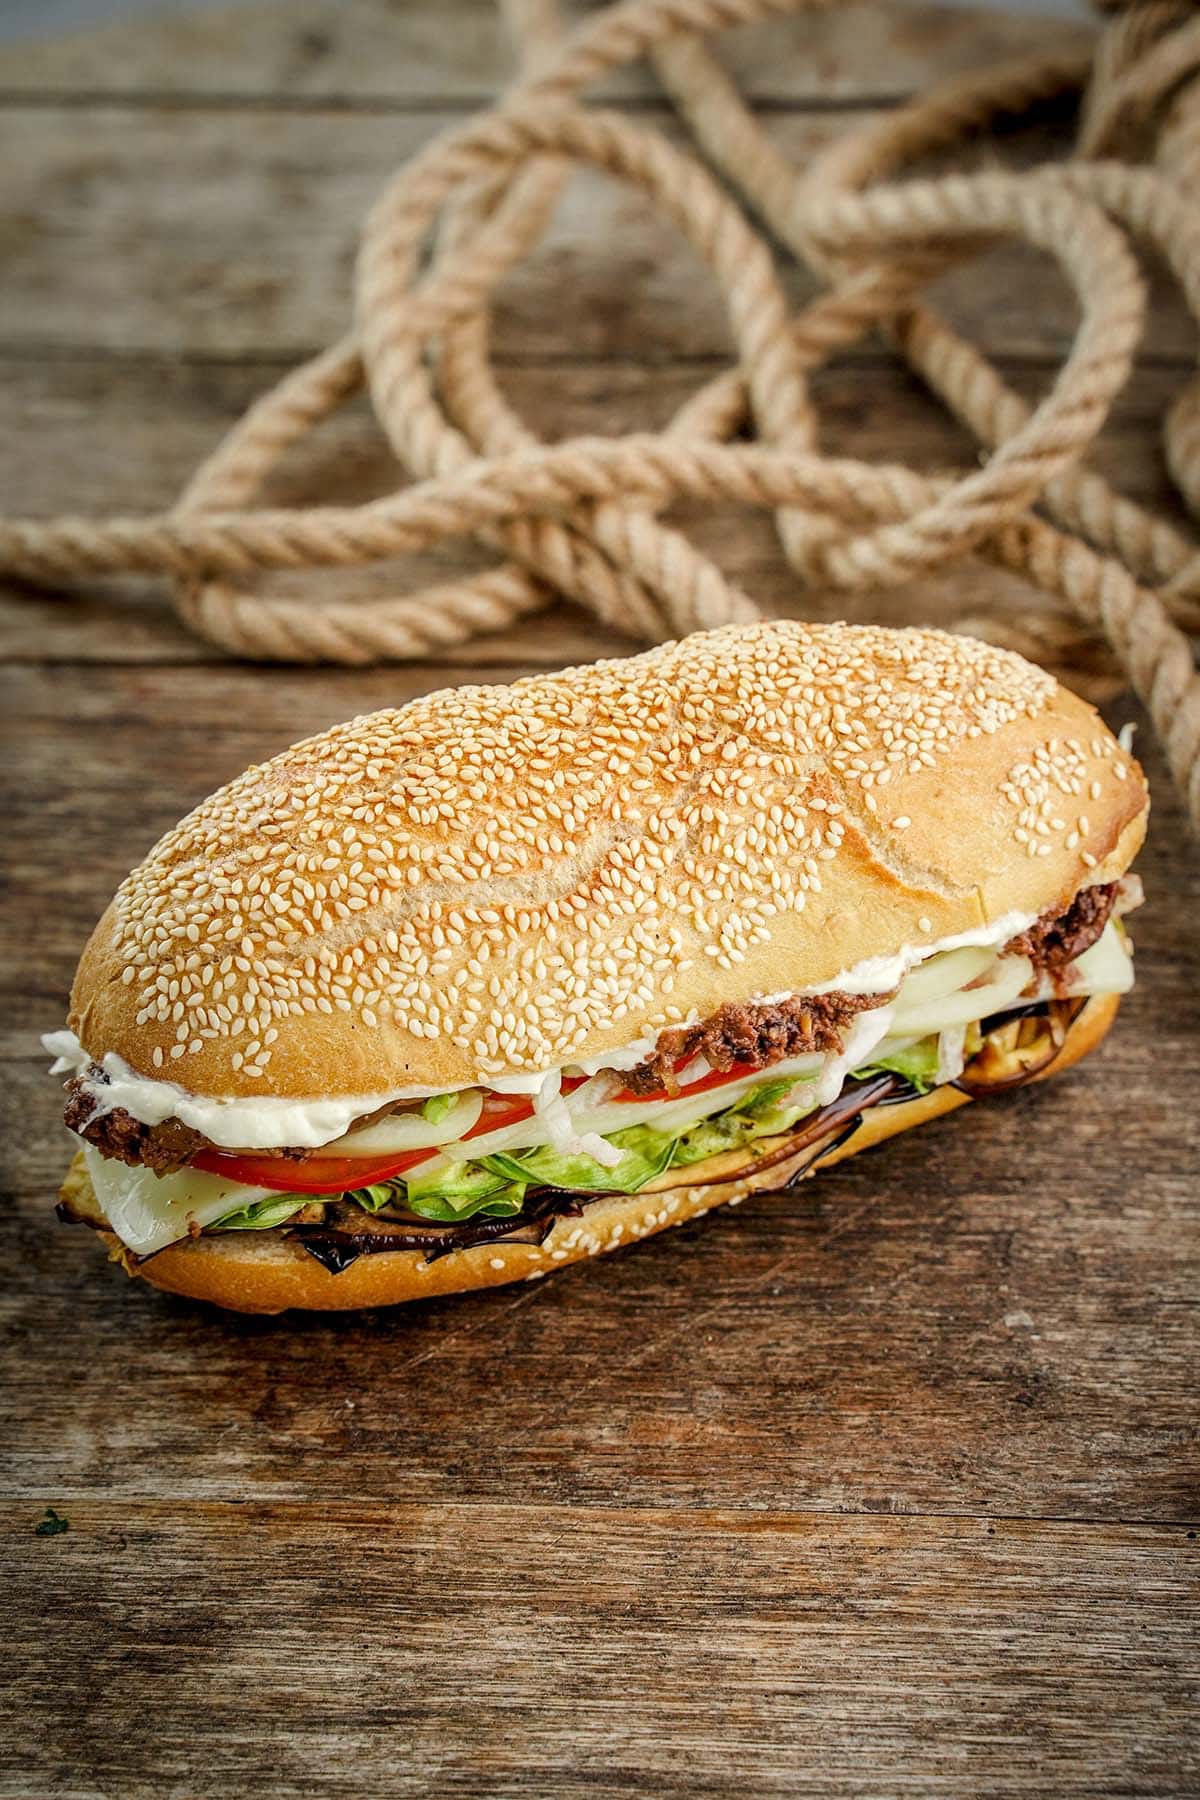 Vegetarian sub with rope behind it.